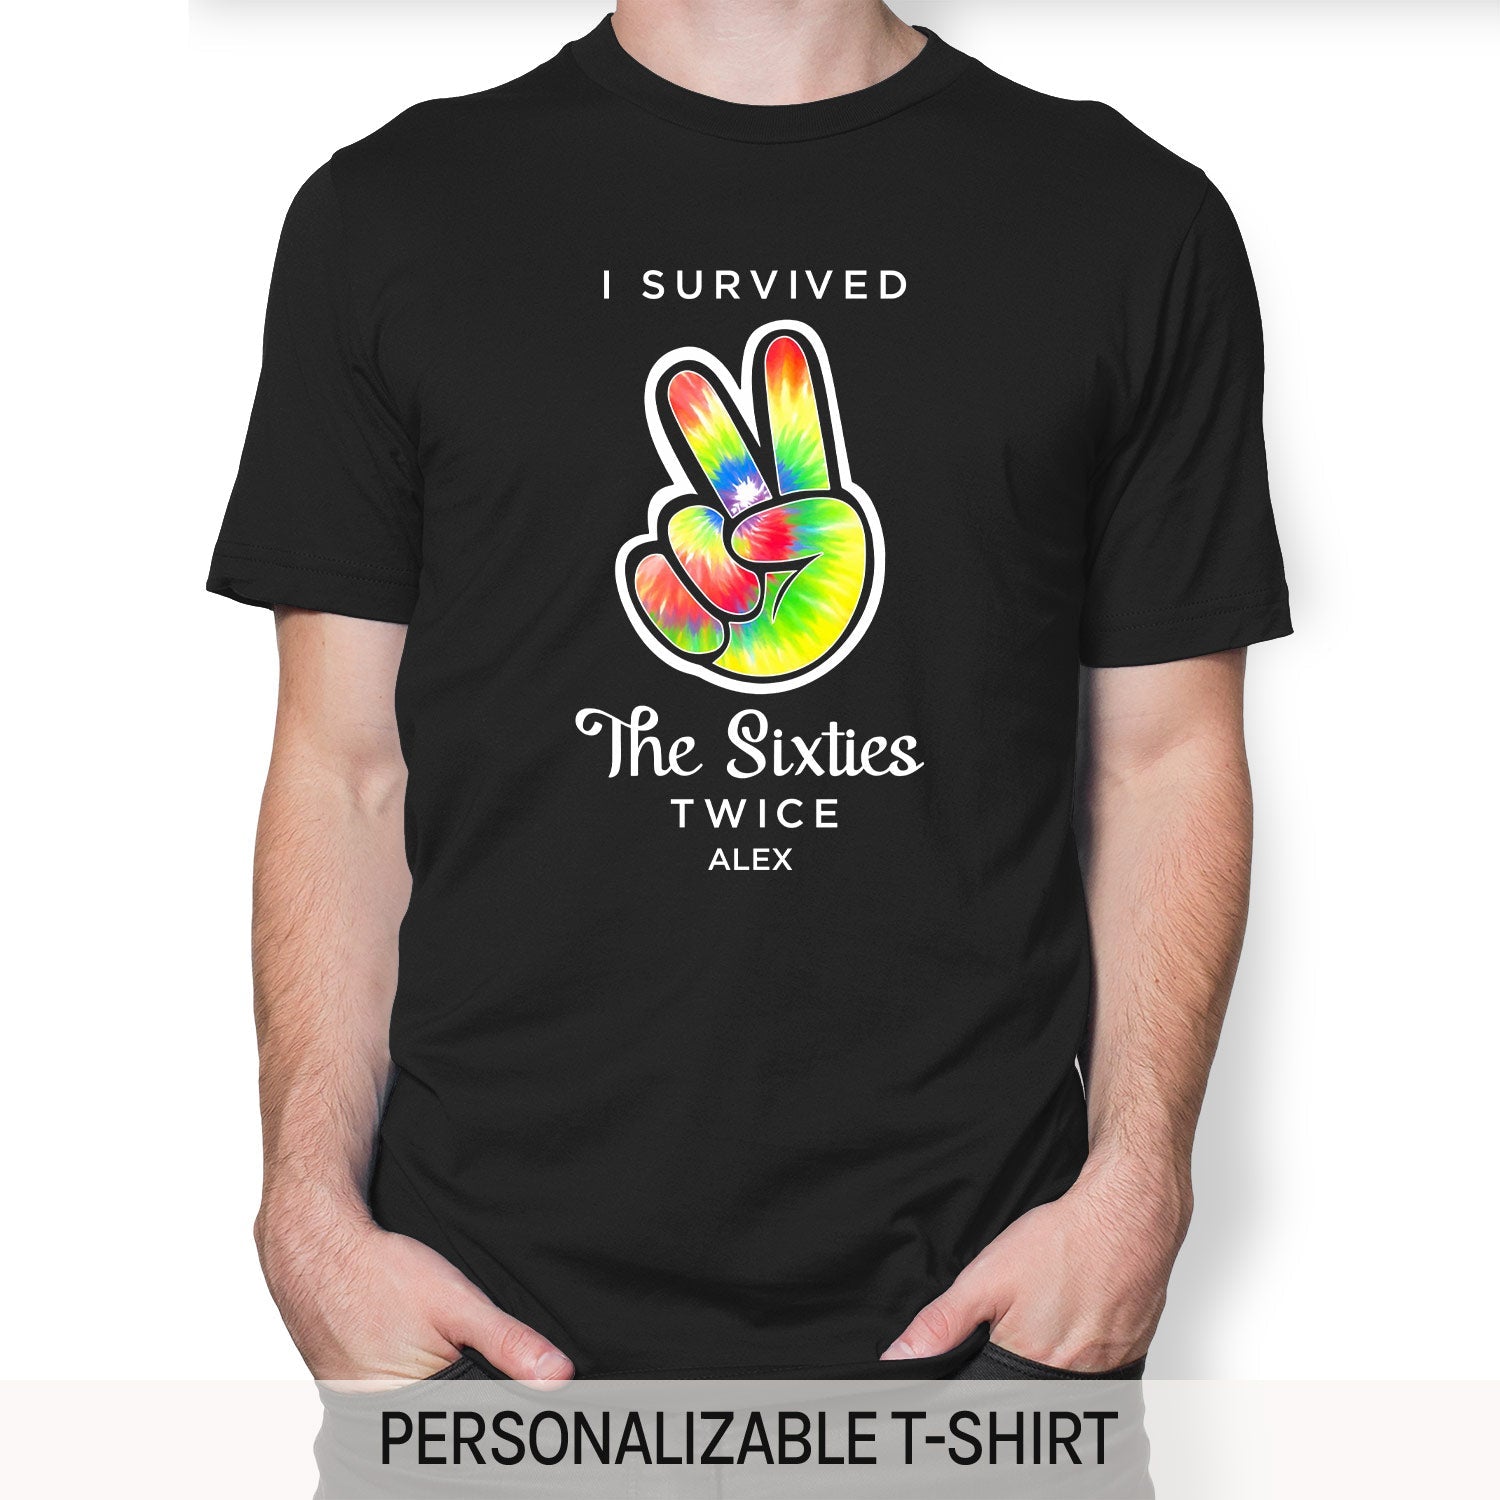 I Survived The Sixties Twice - Personalized 70th Birthday gift For 70 Year Old - Custom Tshirt - MyMindfulGifts